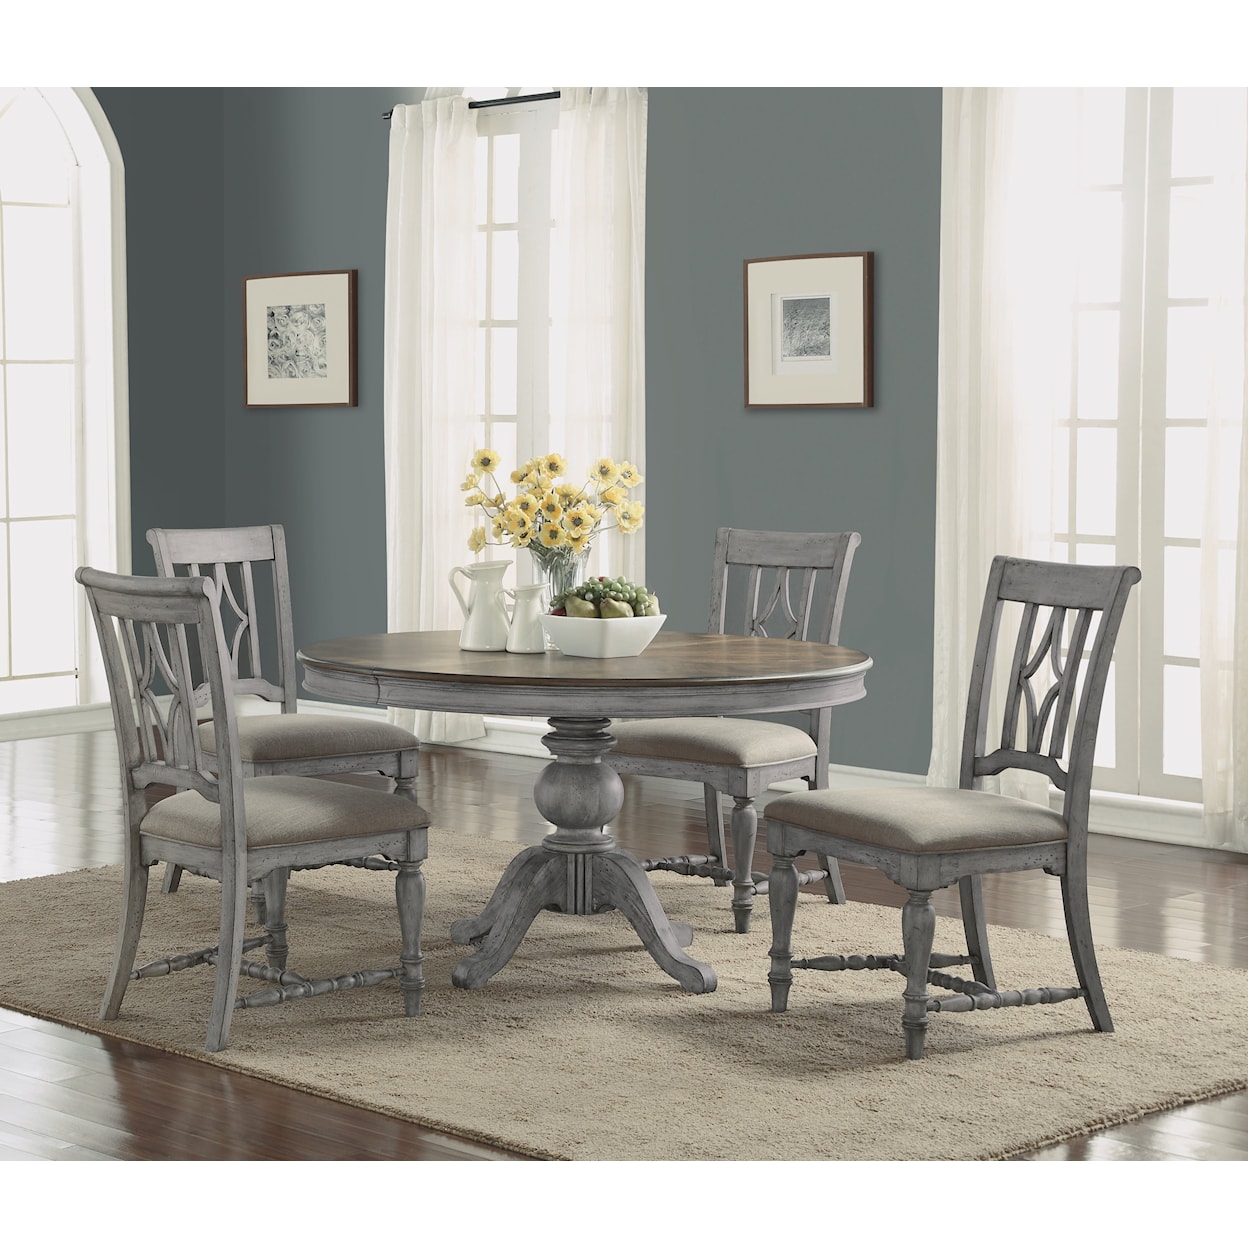 Flexsteel Casegoods Plymouth Table and Chair Set